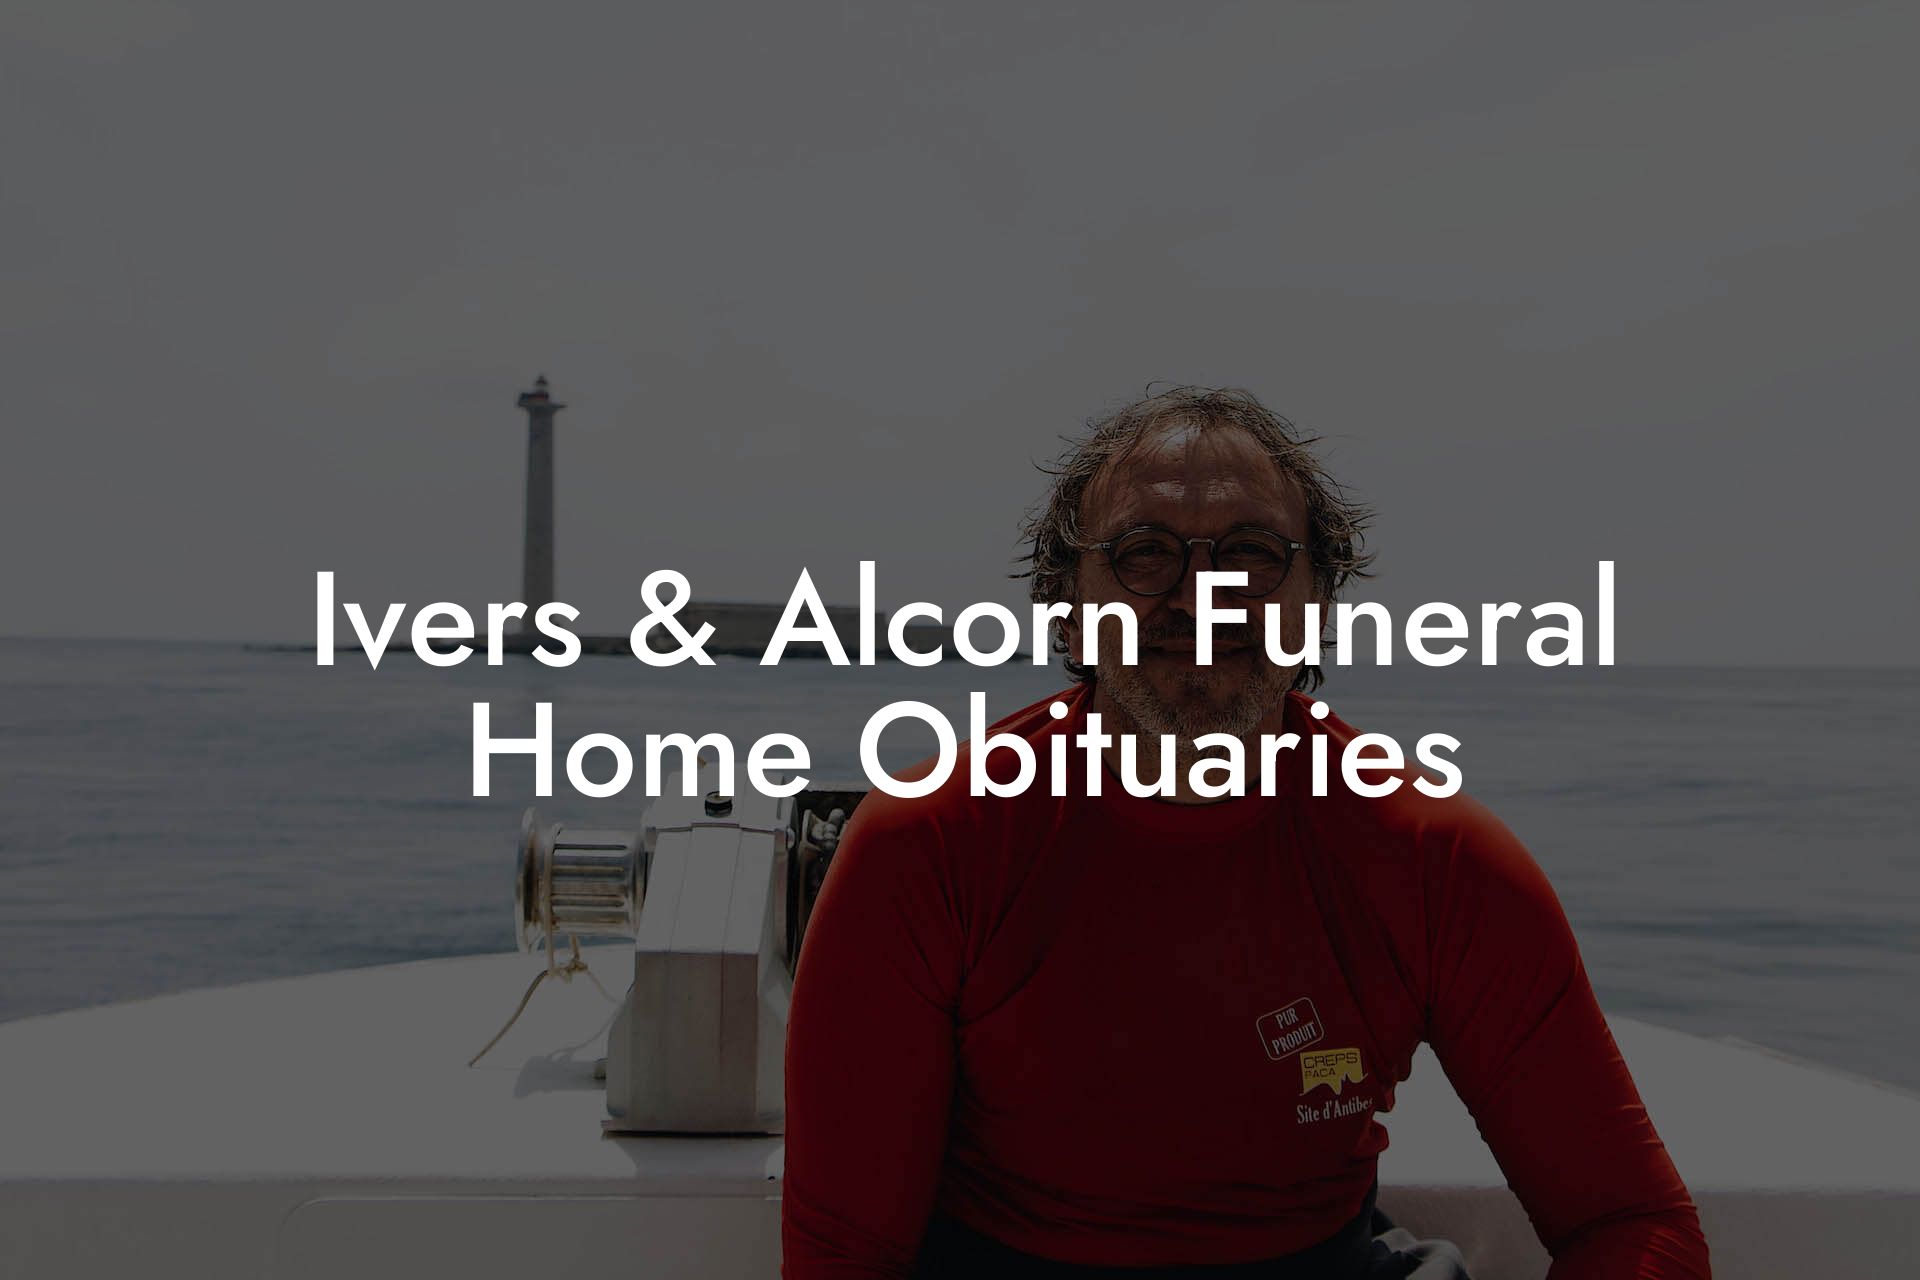 Ivers & Alcorn Funeral Home Obituaries